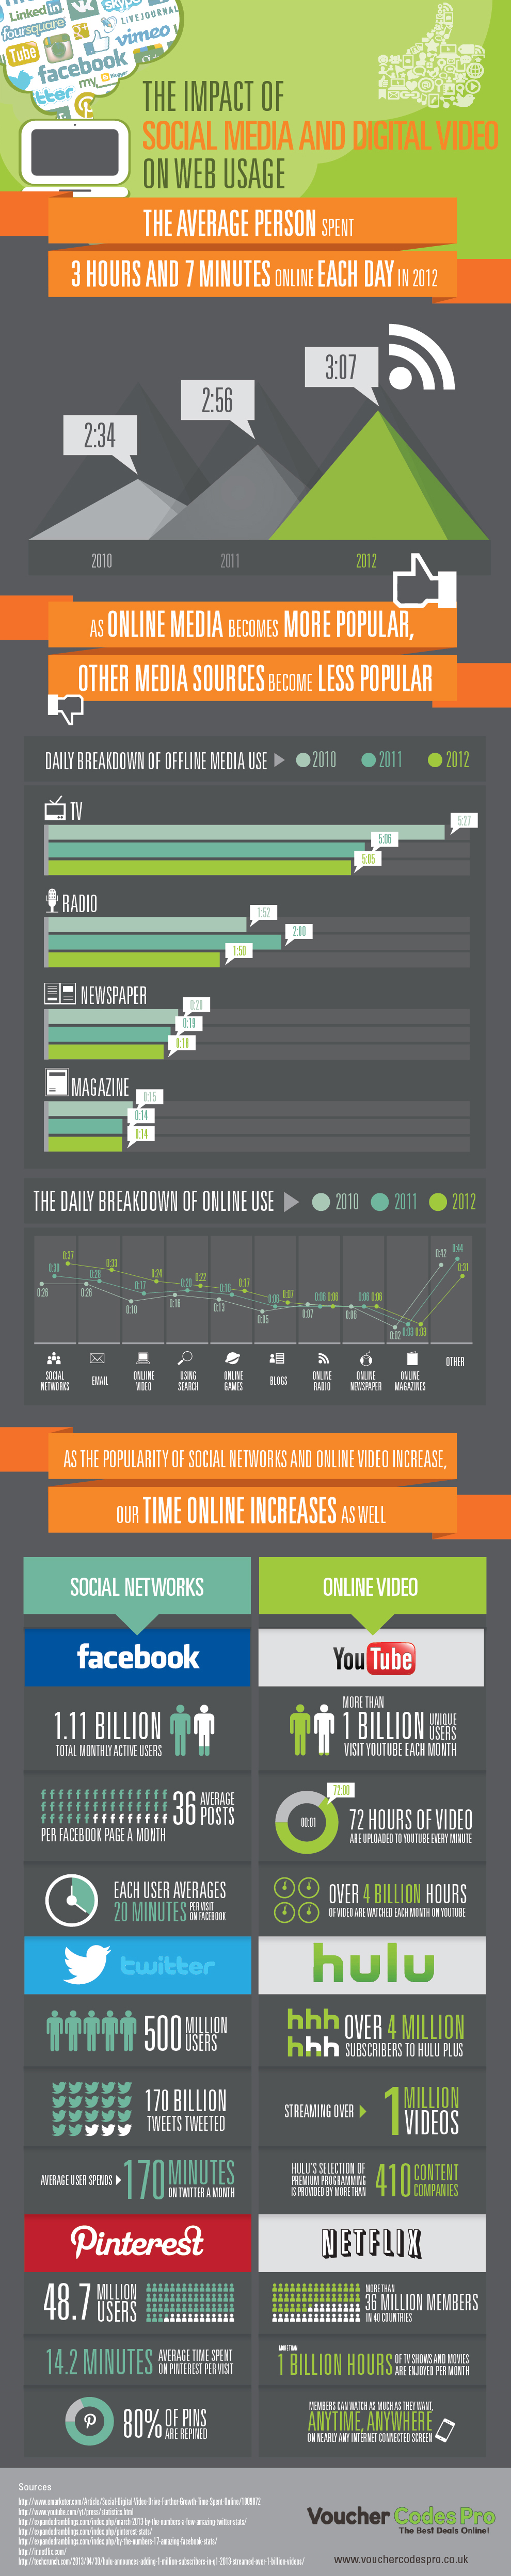 The Impact of Social Media and Digital Video on Web Usage 